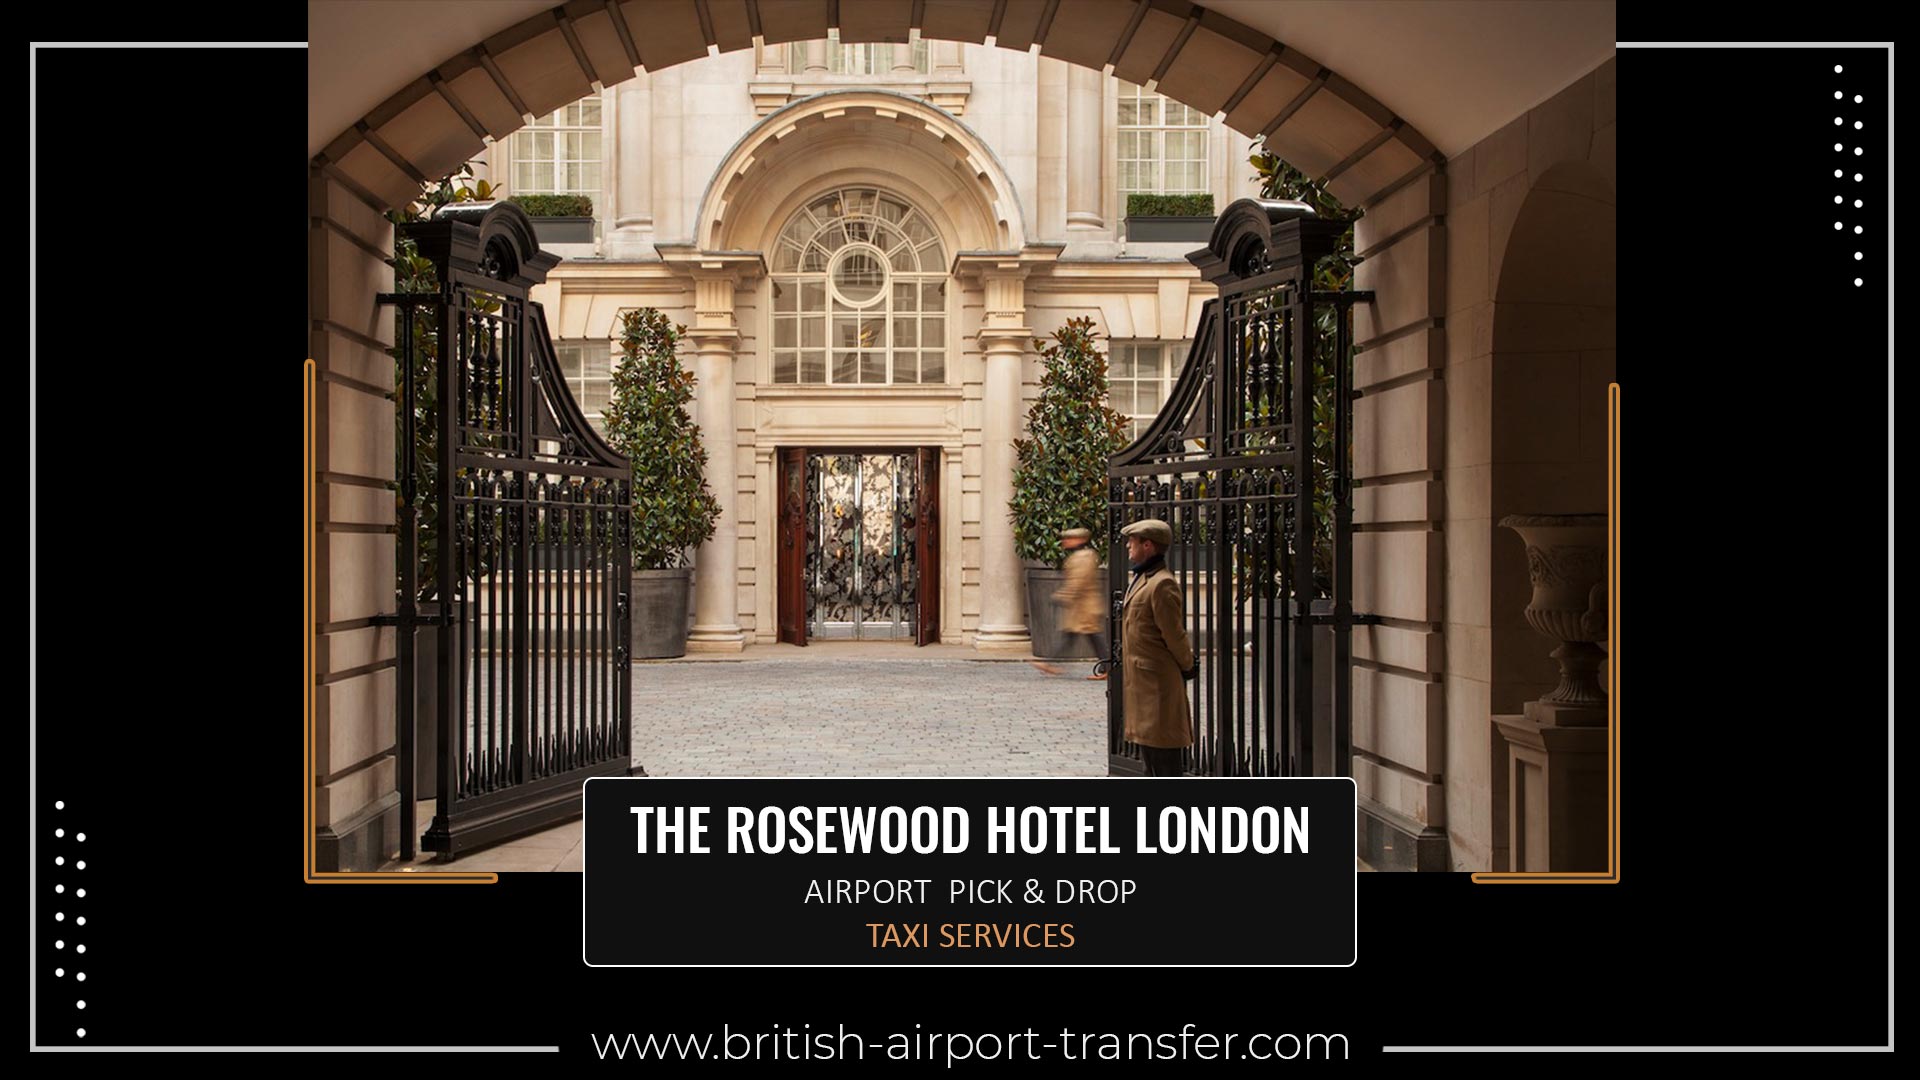 Taxi Cab – The Rosewood Hotel London / WC1V 7EN